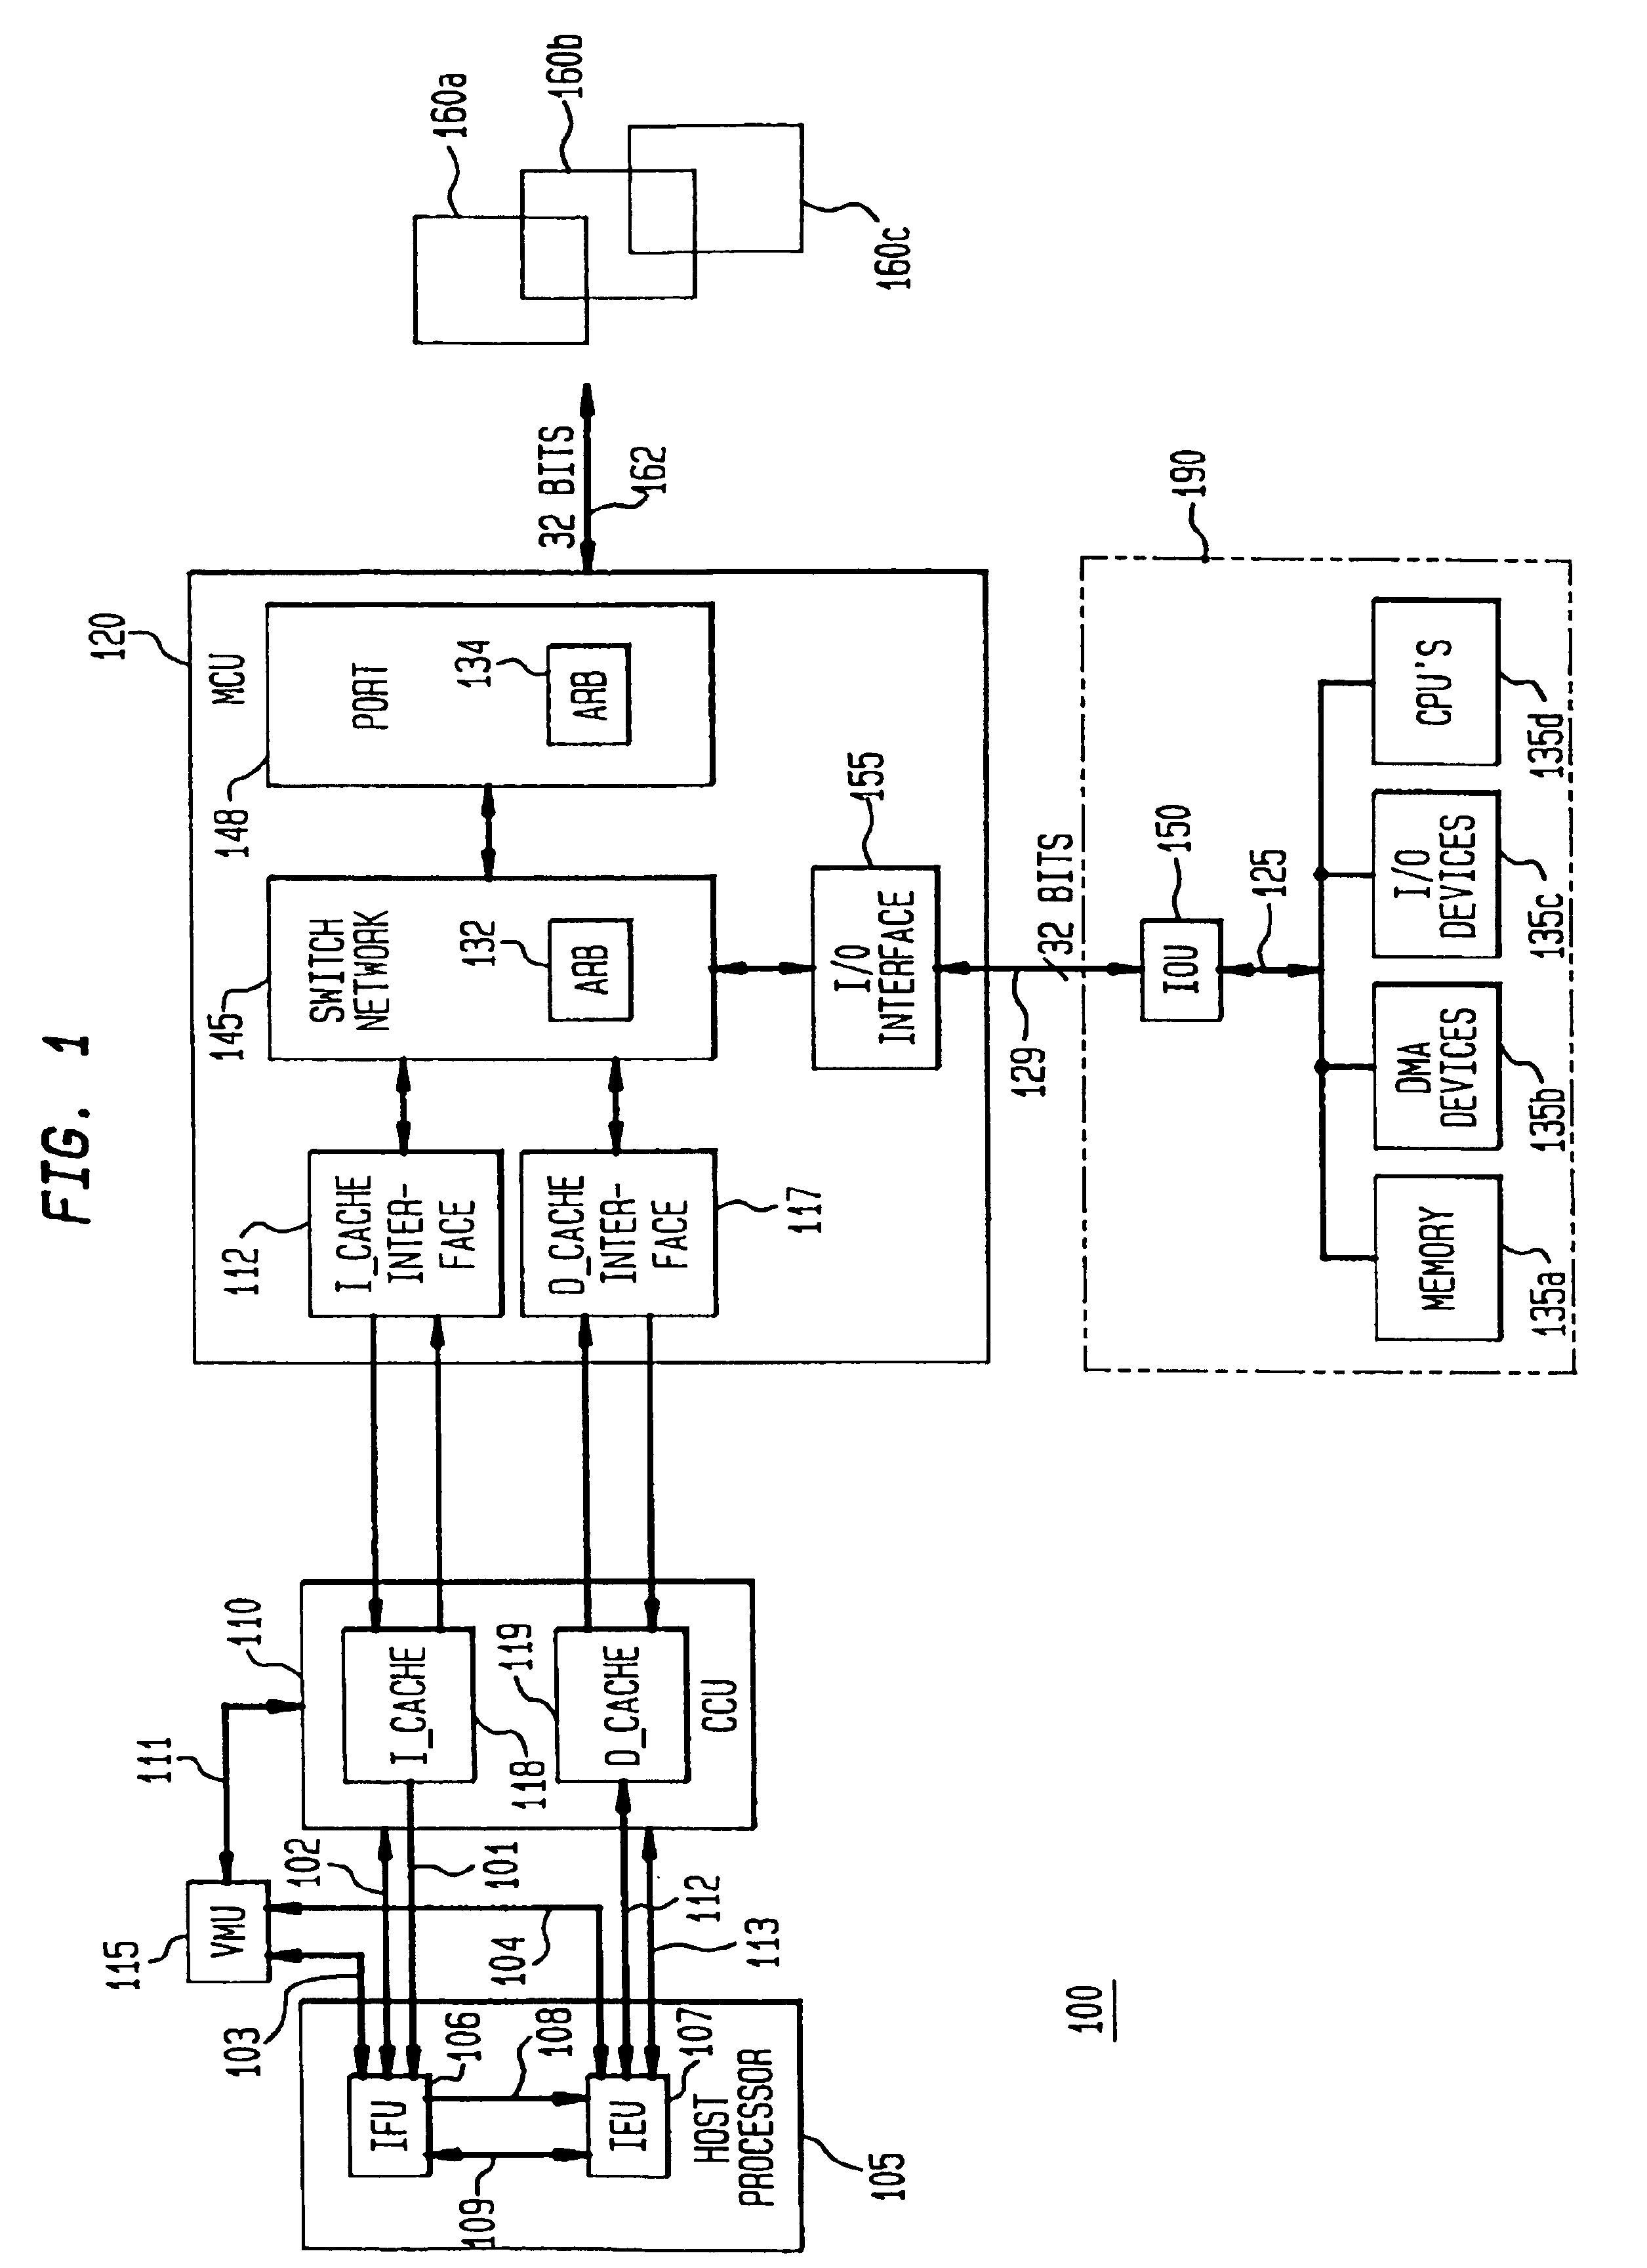 System and method for handling load and/or store operations in a superscalar microprocessor